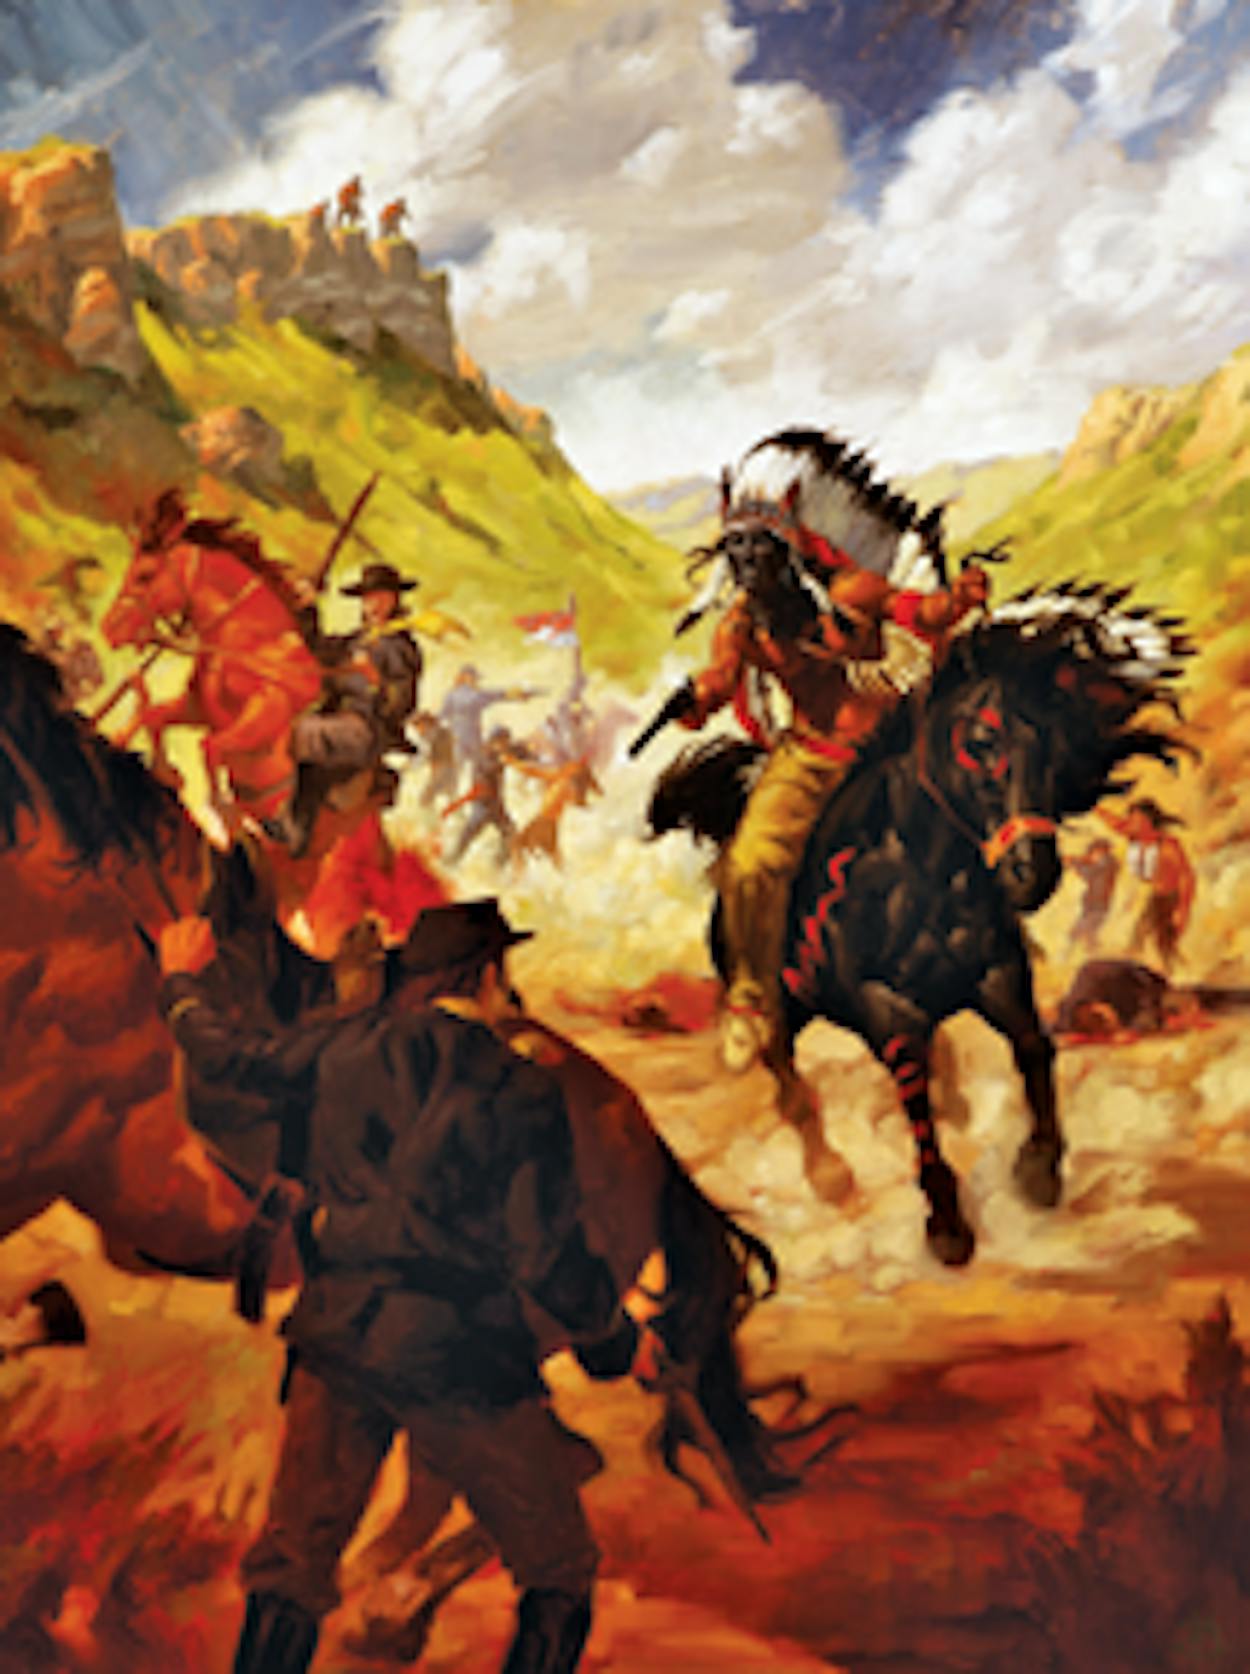 Comanche Indians and federal soldiers fighting on horseback painting.